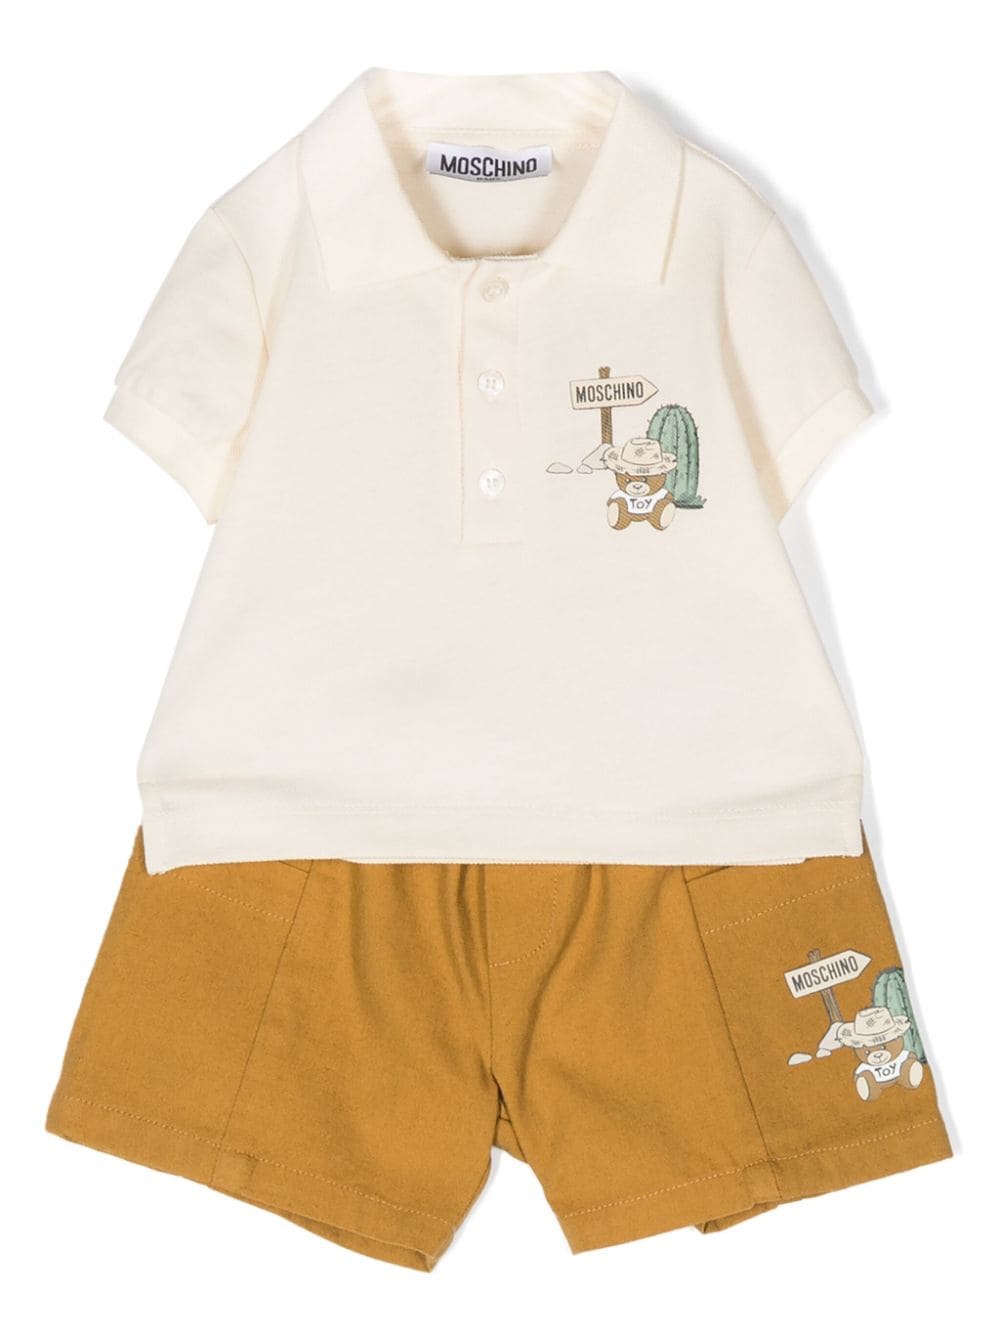 Moschino Babies' Logo印花polo领短裤套装 In Brown